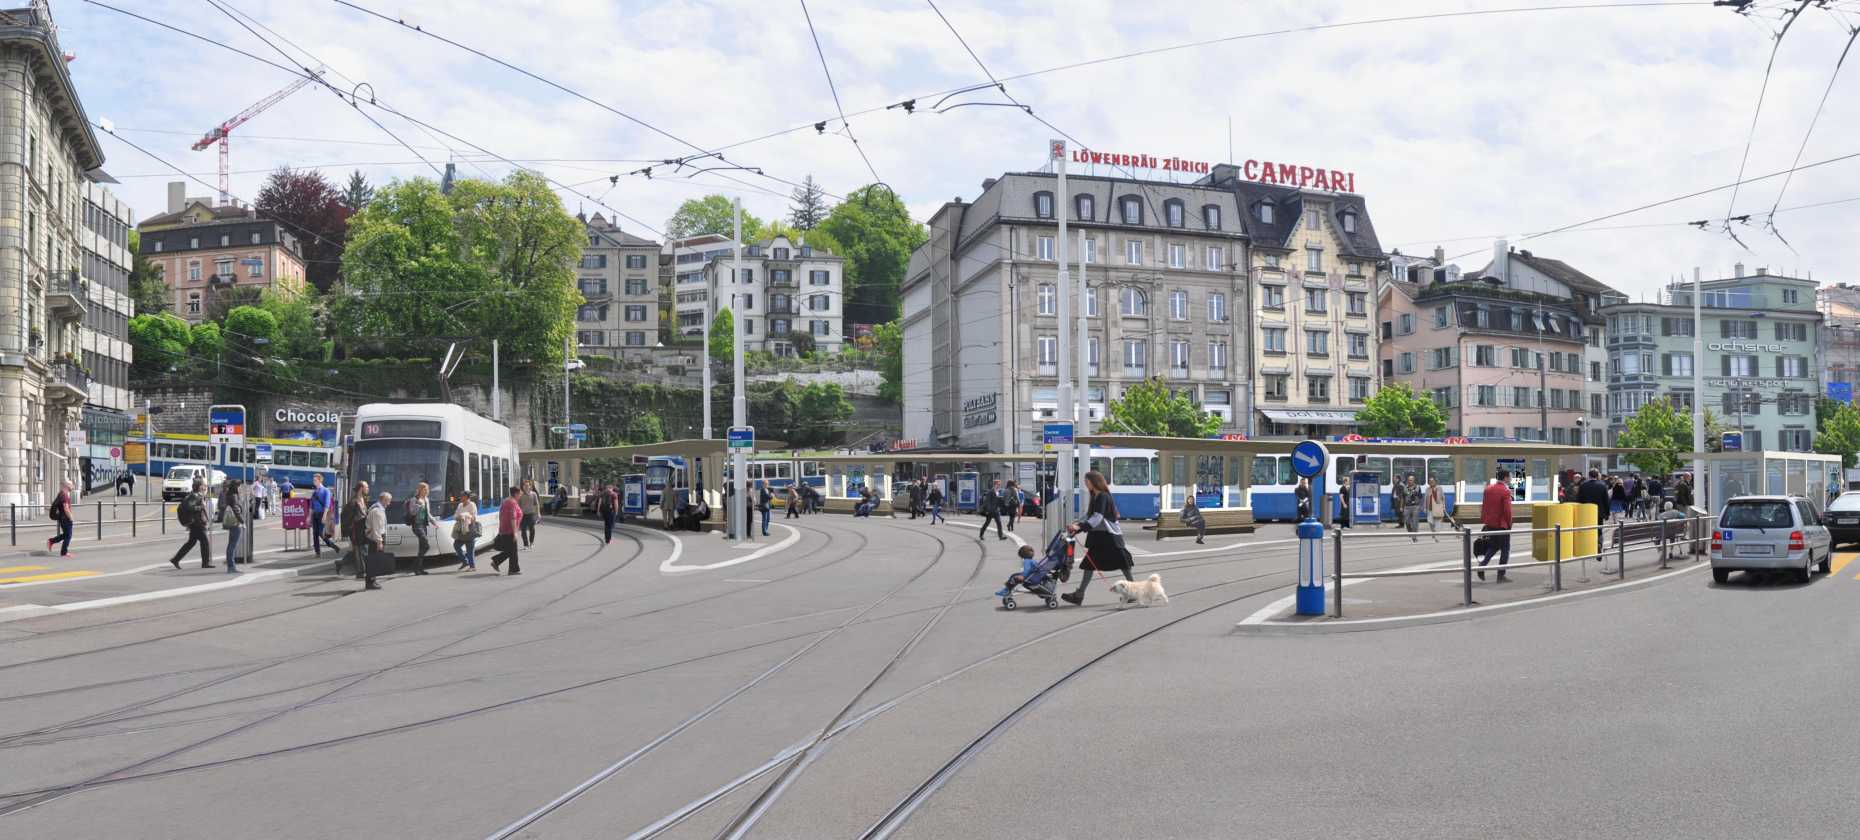 Enlarged view: Central Zürich